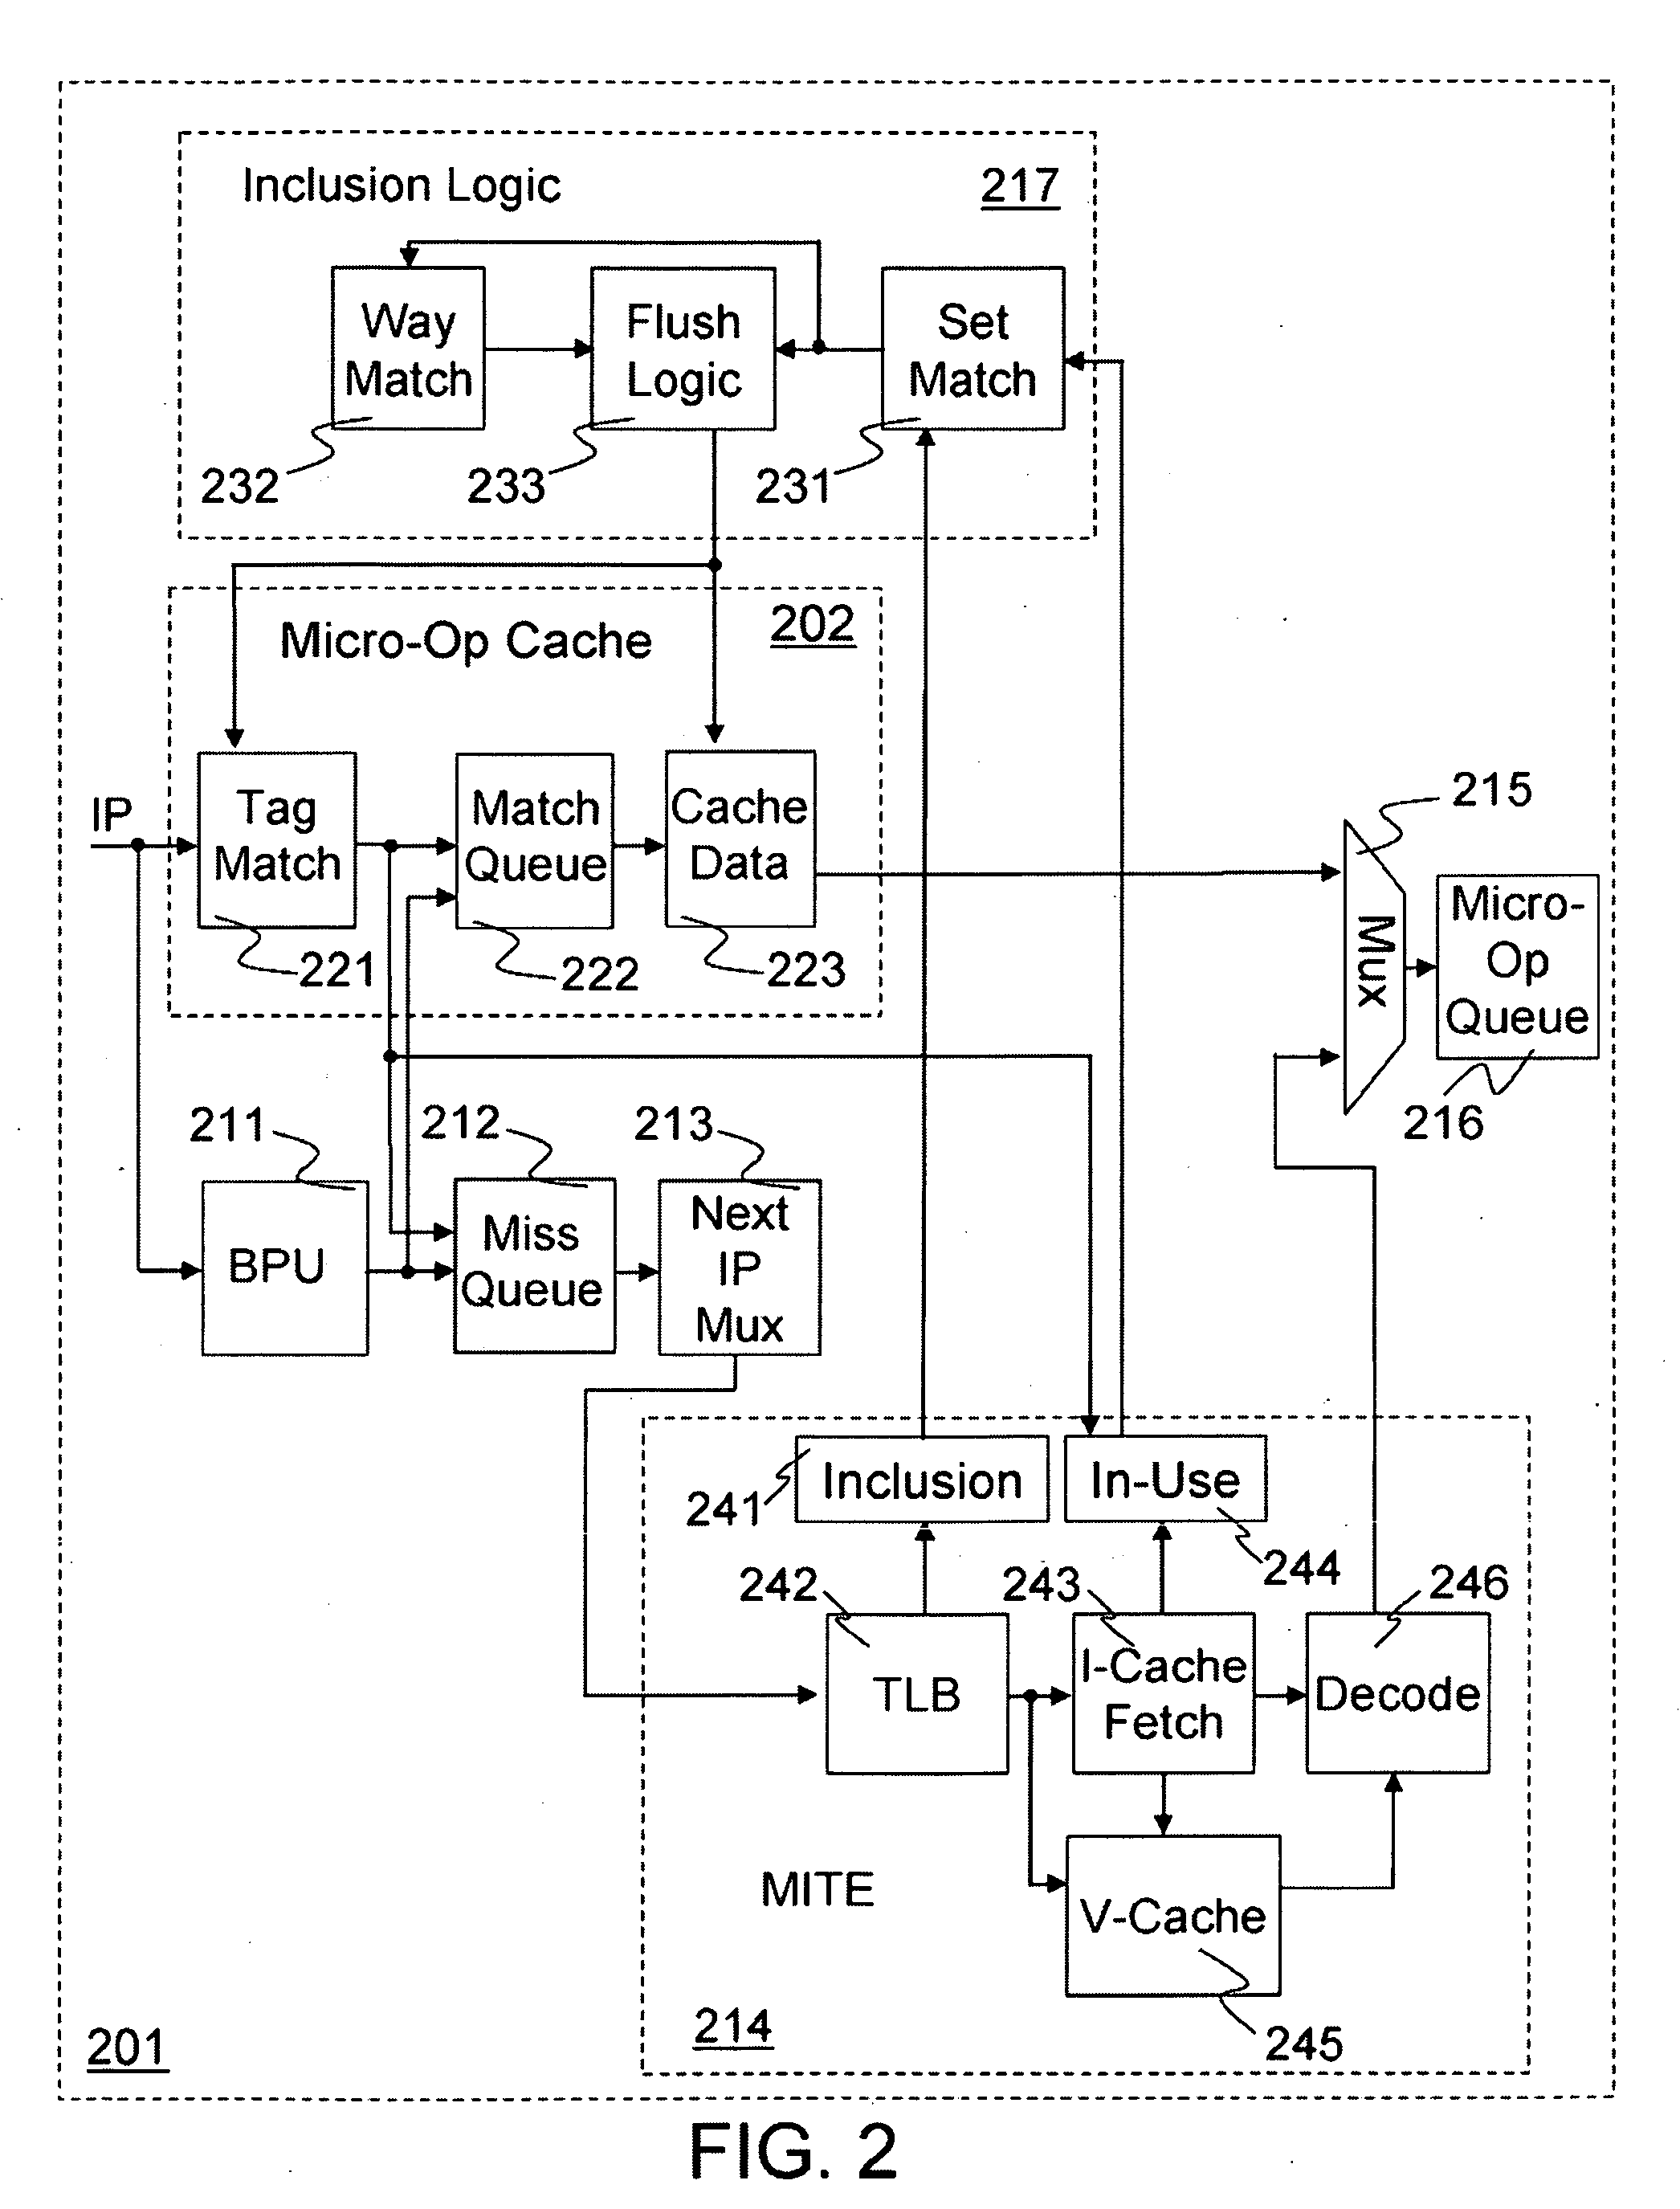 Method and apparatus for pipeline inclusion and instruction restarts in a micro-op cache of a processor